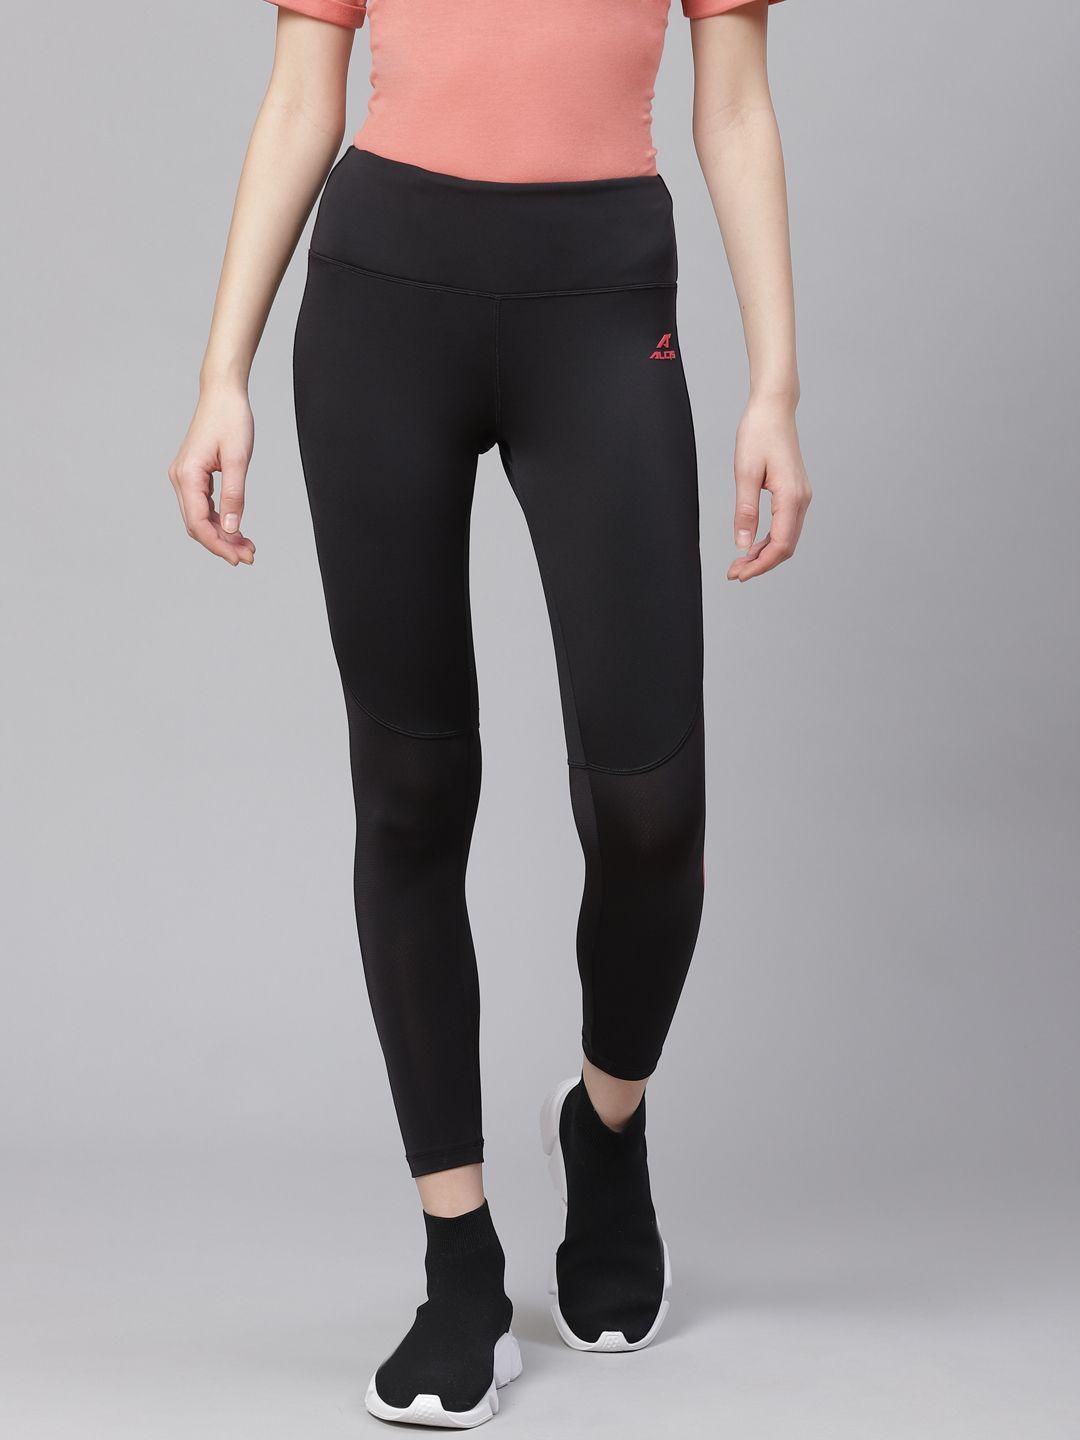 alcis-women-black-solid-cropped-training-tights